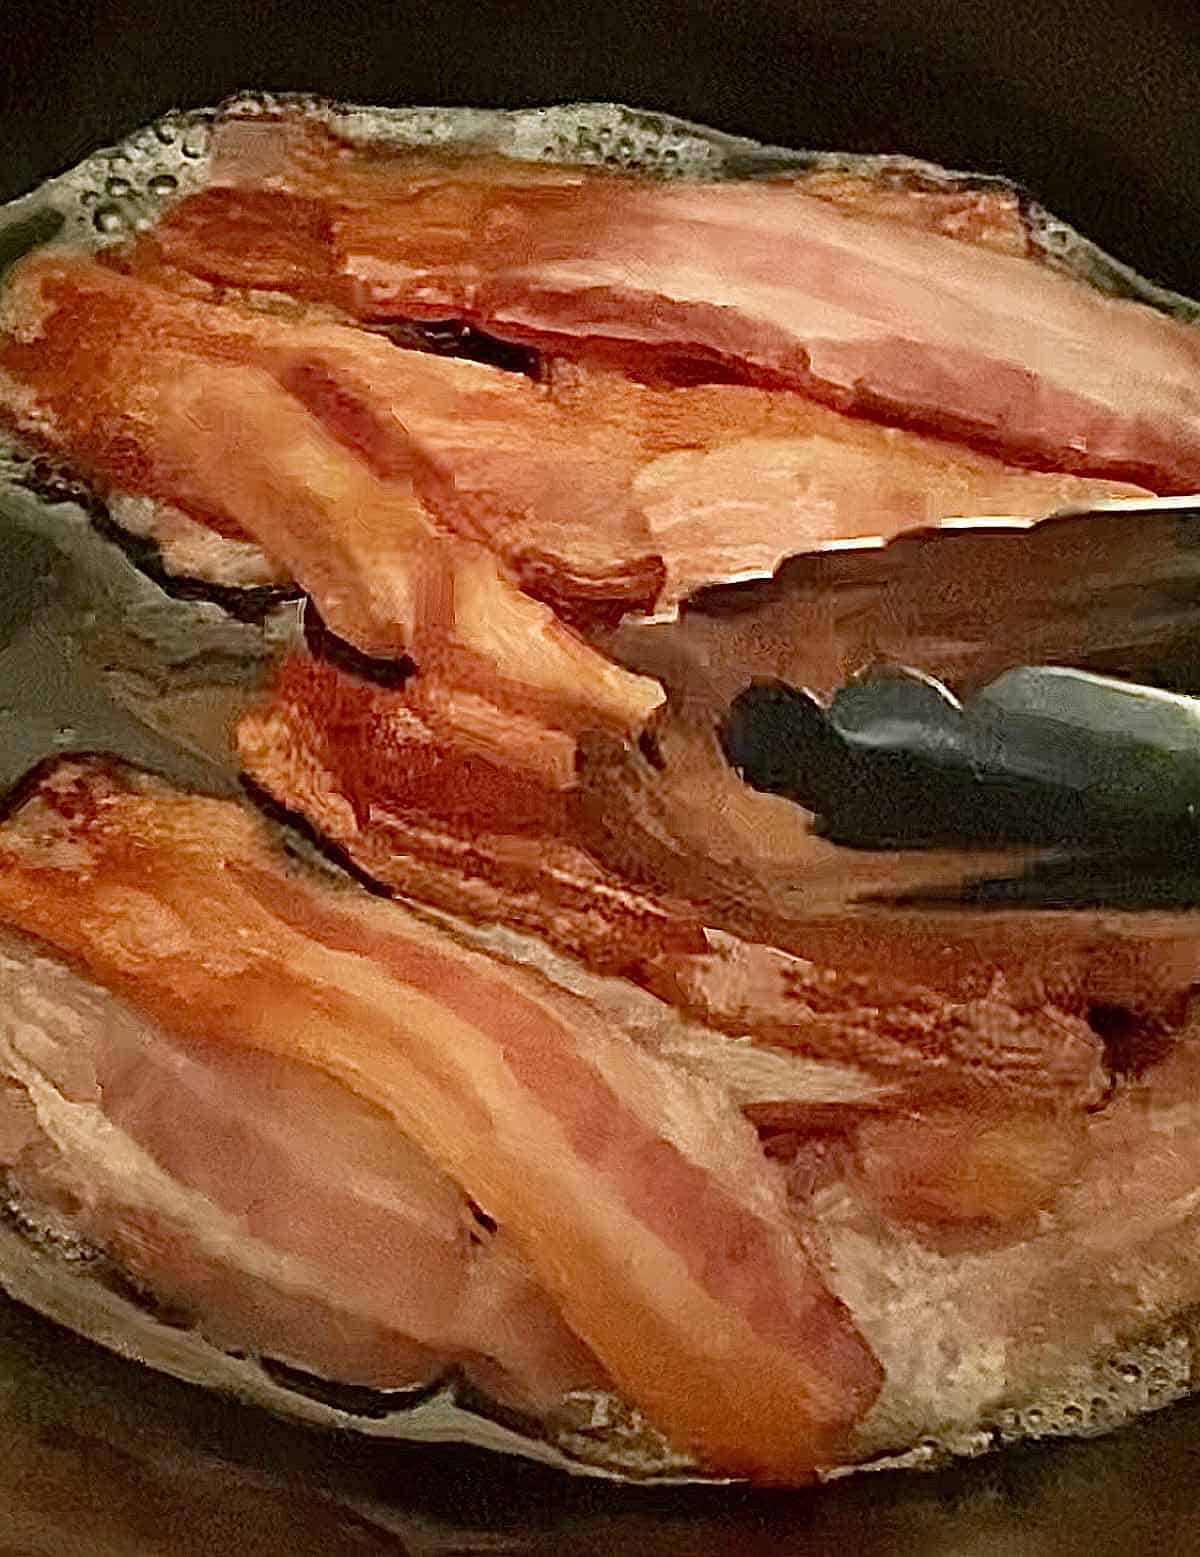 A pair of tongs rearranging partially cooked bacon slices in a slow cooker.